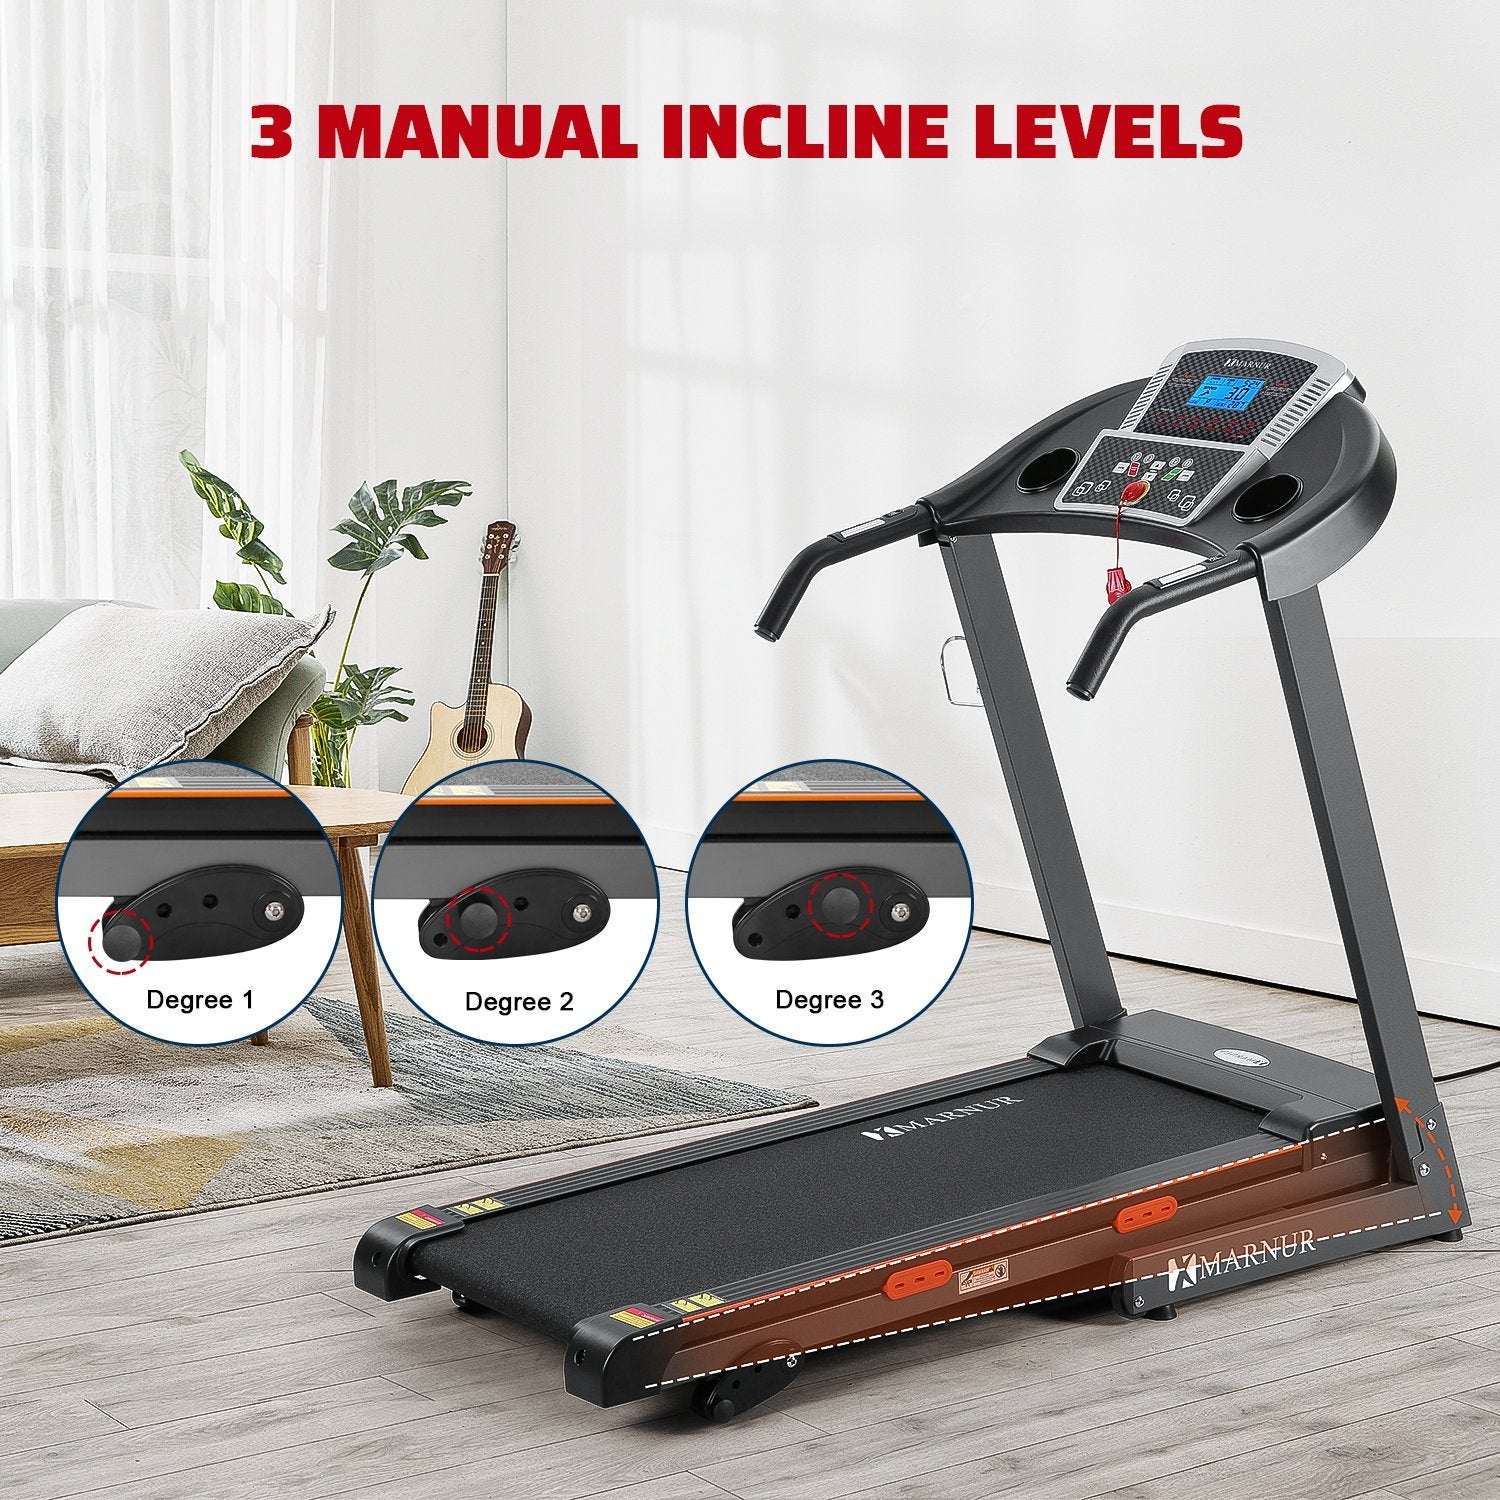 Load image into Gallery viewer, MARNUR Electric Treadmill Foldable 17&quot; Wide Running Machine 3 Levels Manual Incline 2.5 HP Power 15 Preset Program Easy Assembly Max Speed 8.5 MPH with Large Display &amp; Cup Holder for Home Use - NAIPO
